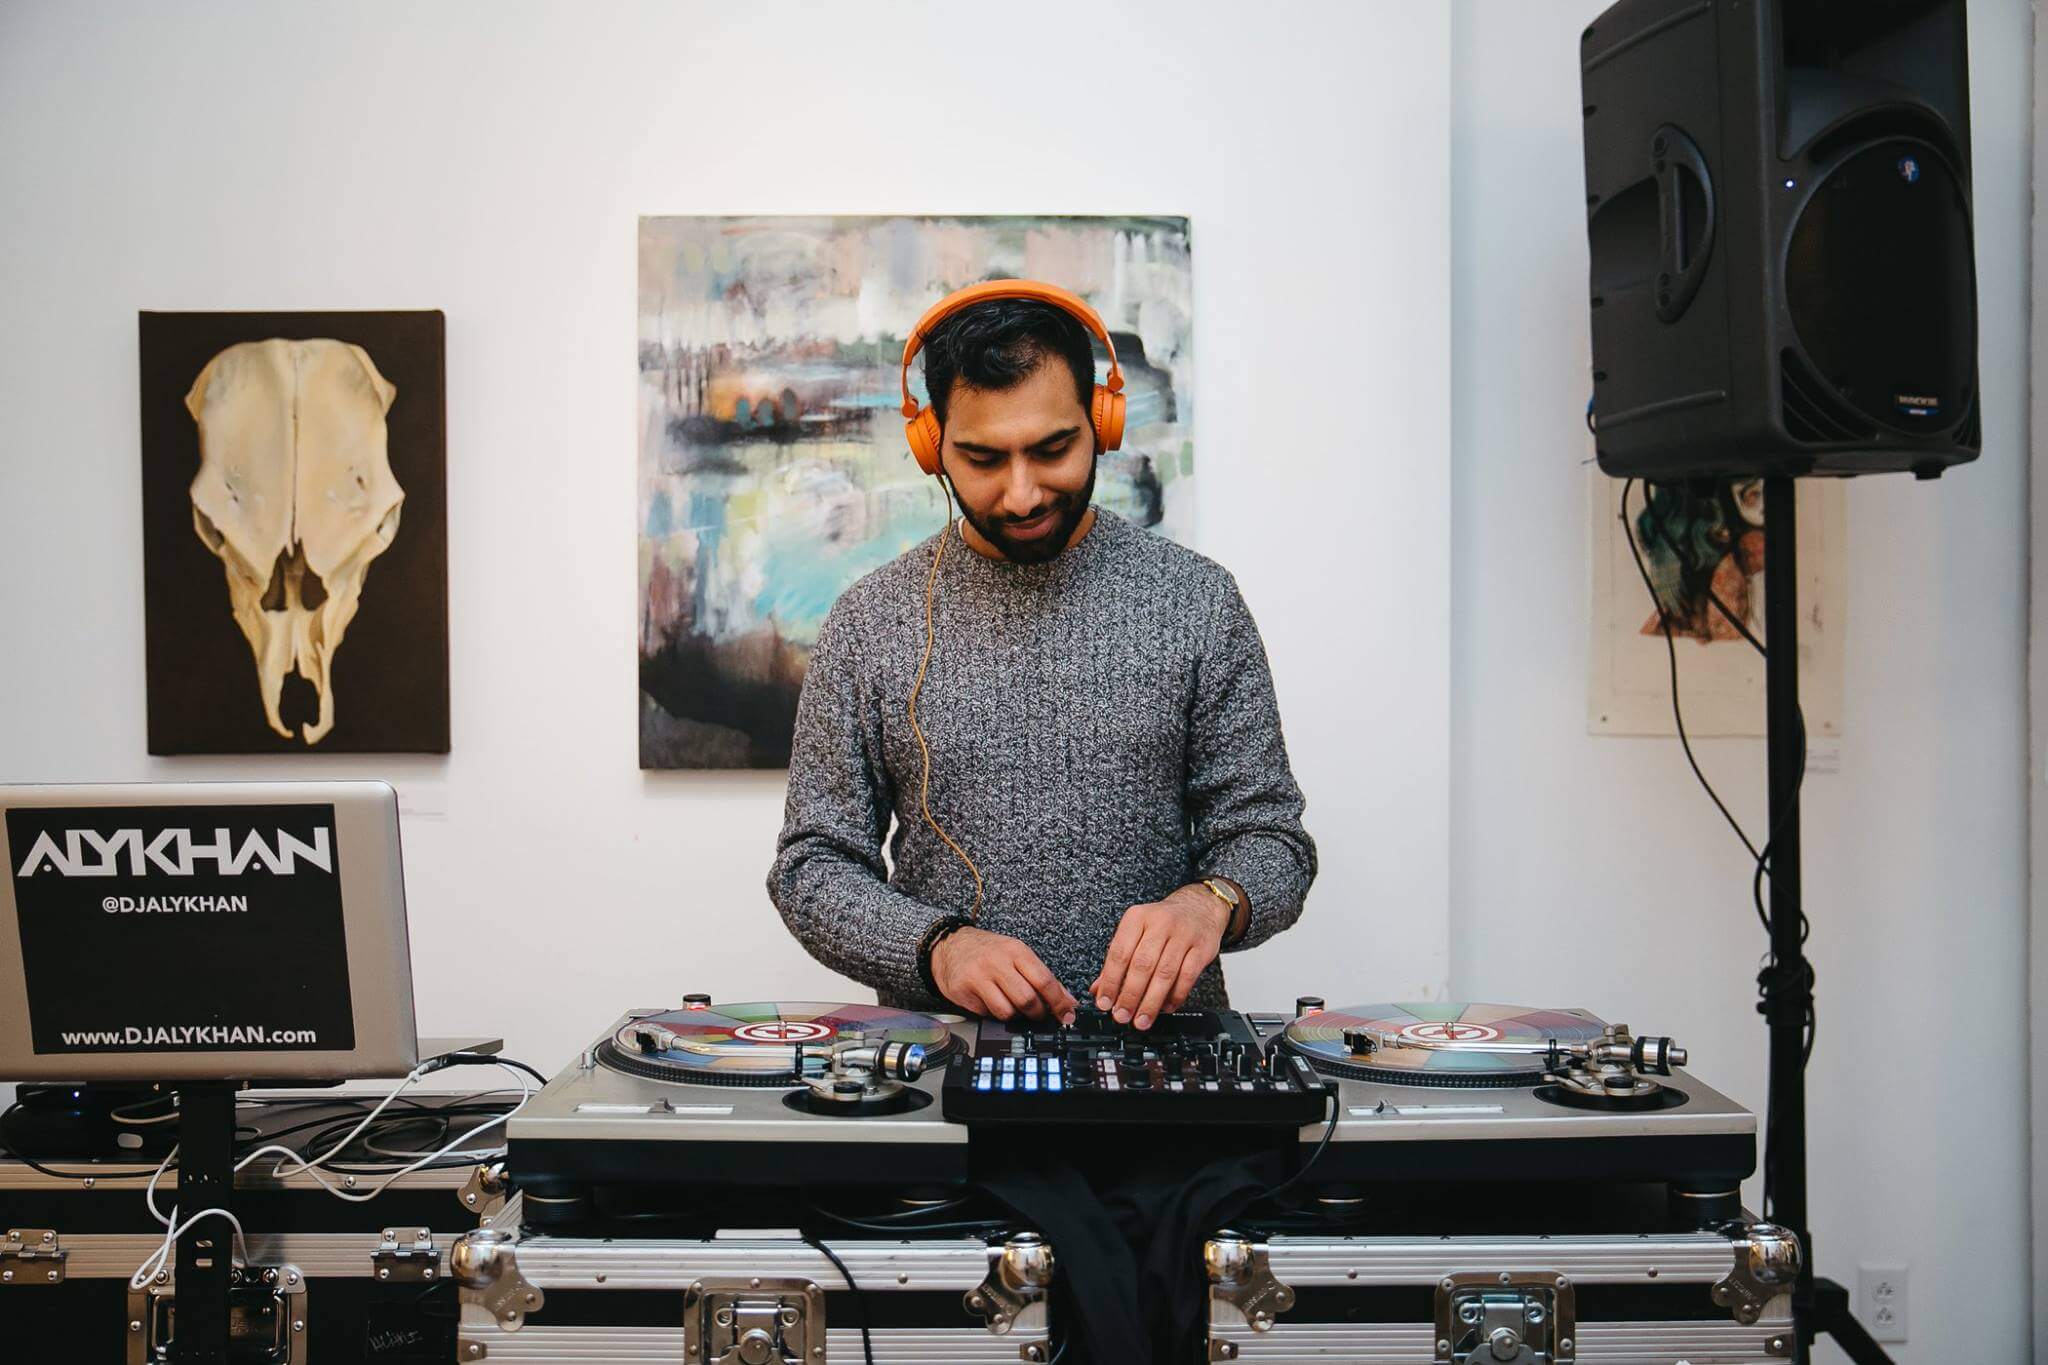 DJ Alykhan encourages you to be a part of Rochester’s engaging nightlife.